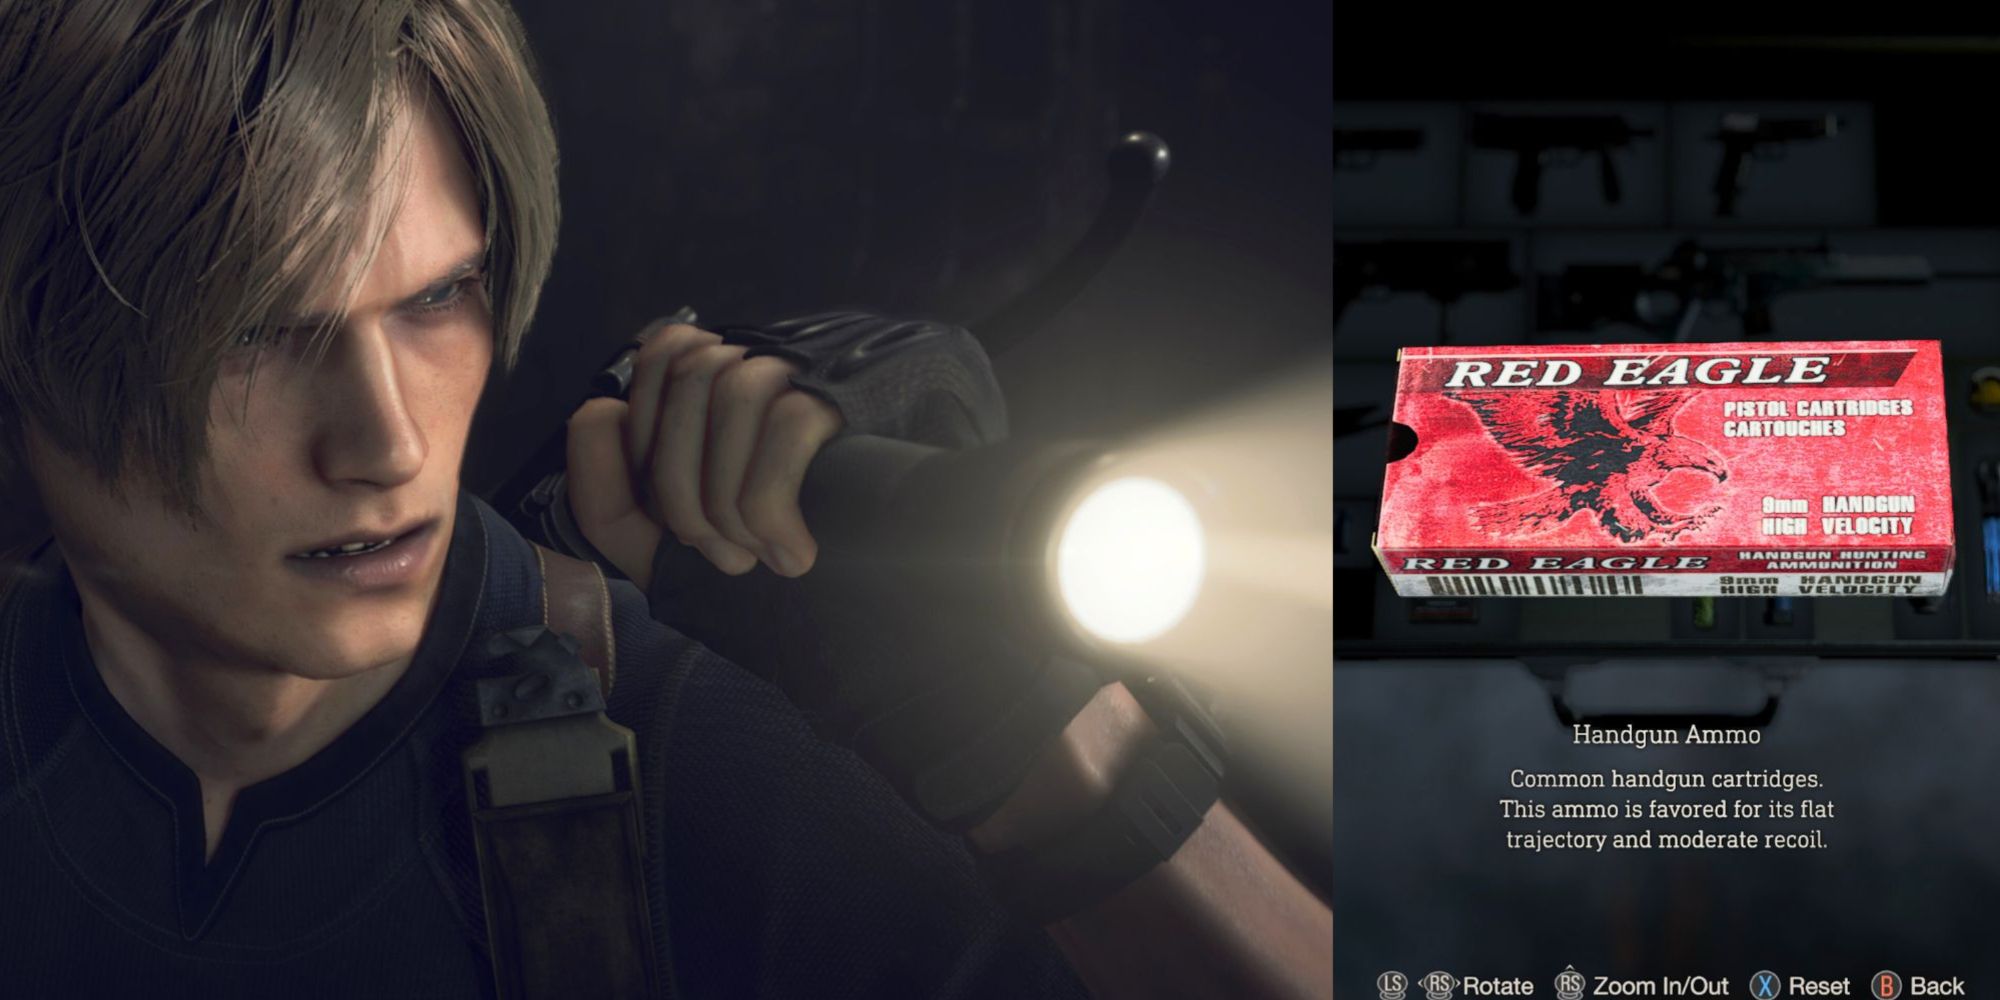 Resident Evil 4 Remake: How to Get Unlimited Ammo